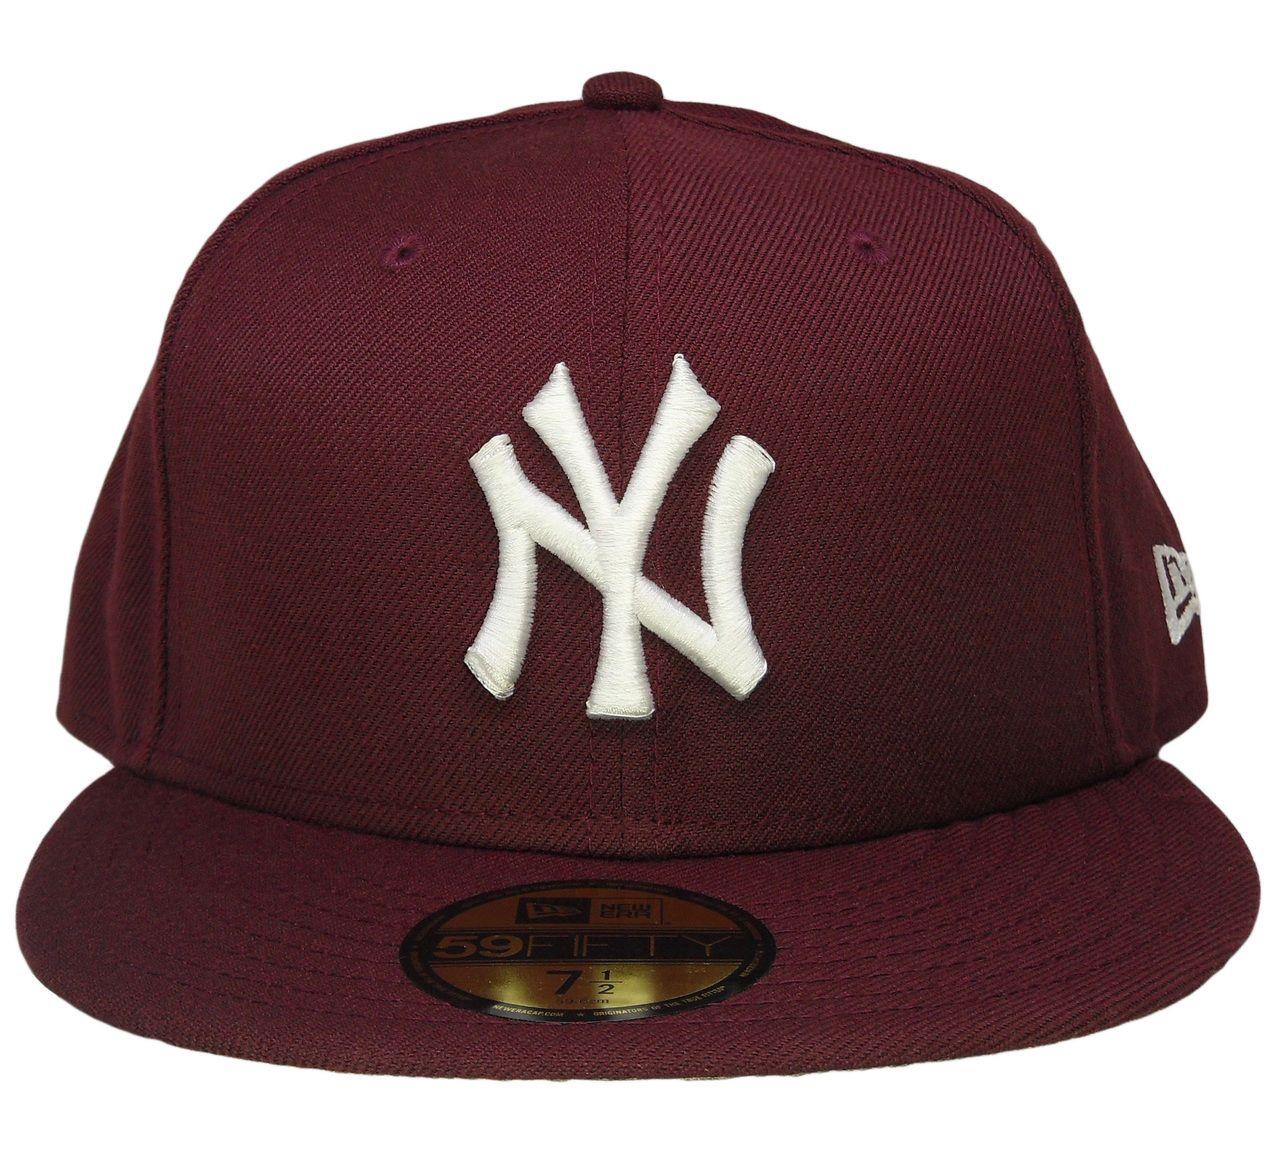 Maroon and White Logo - New York Yankees New Era 59Fifty Basic Fitted Hat - Maroon, White